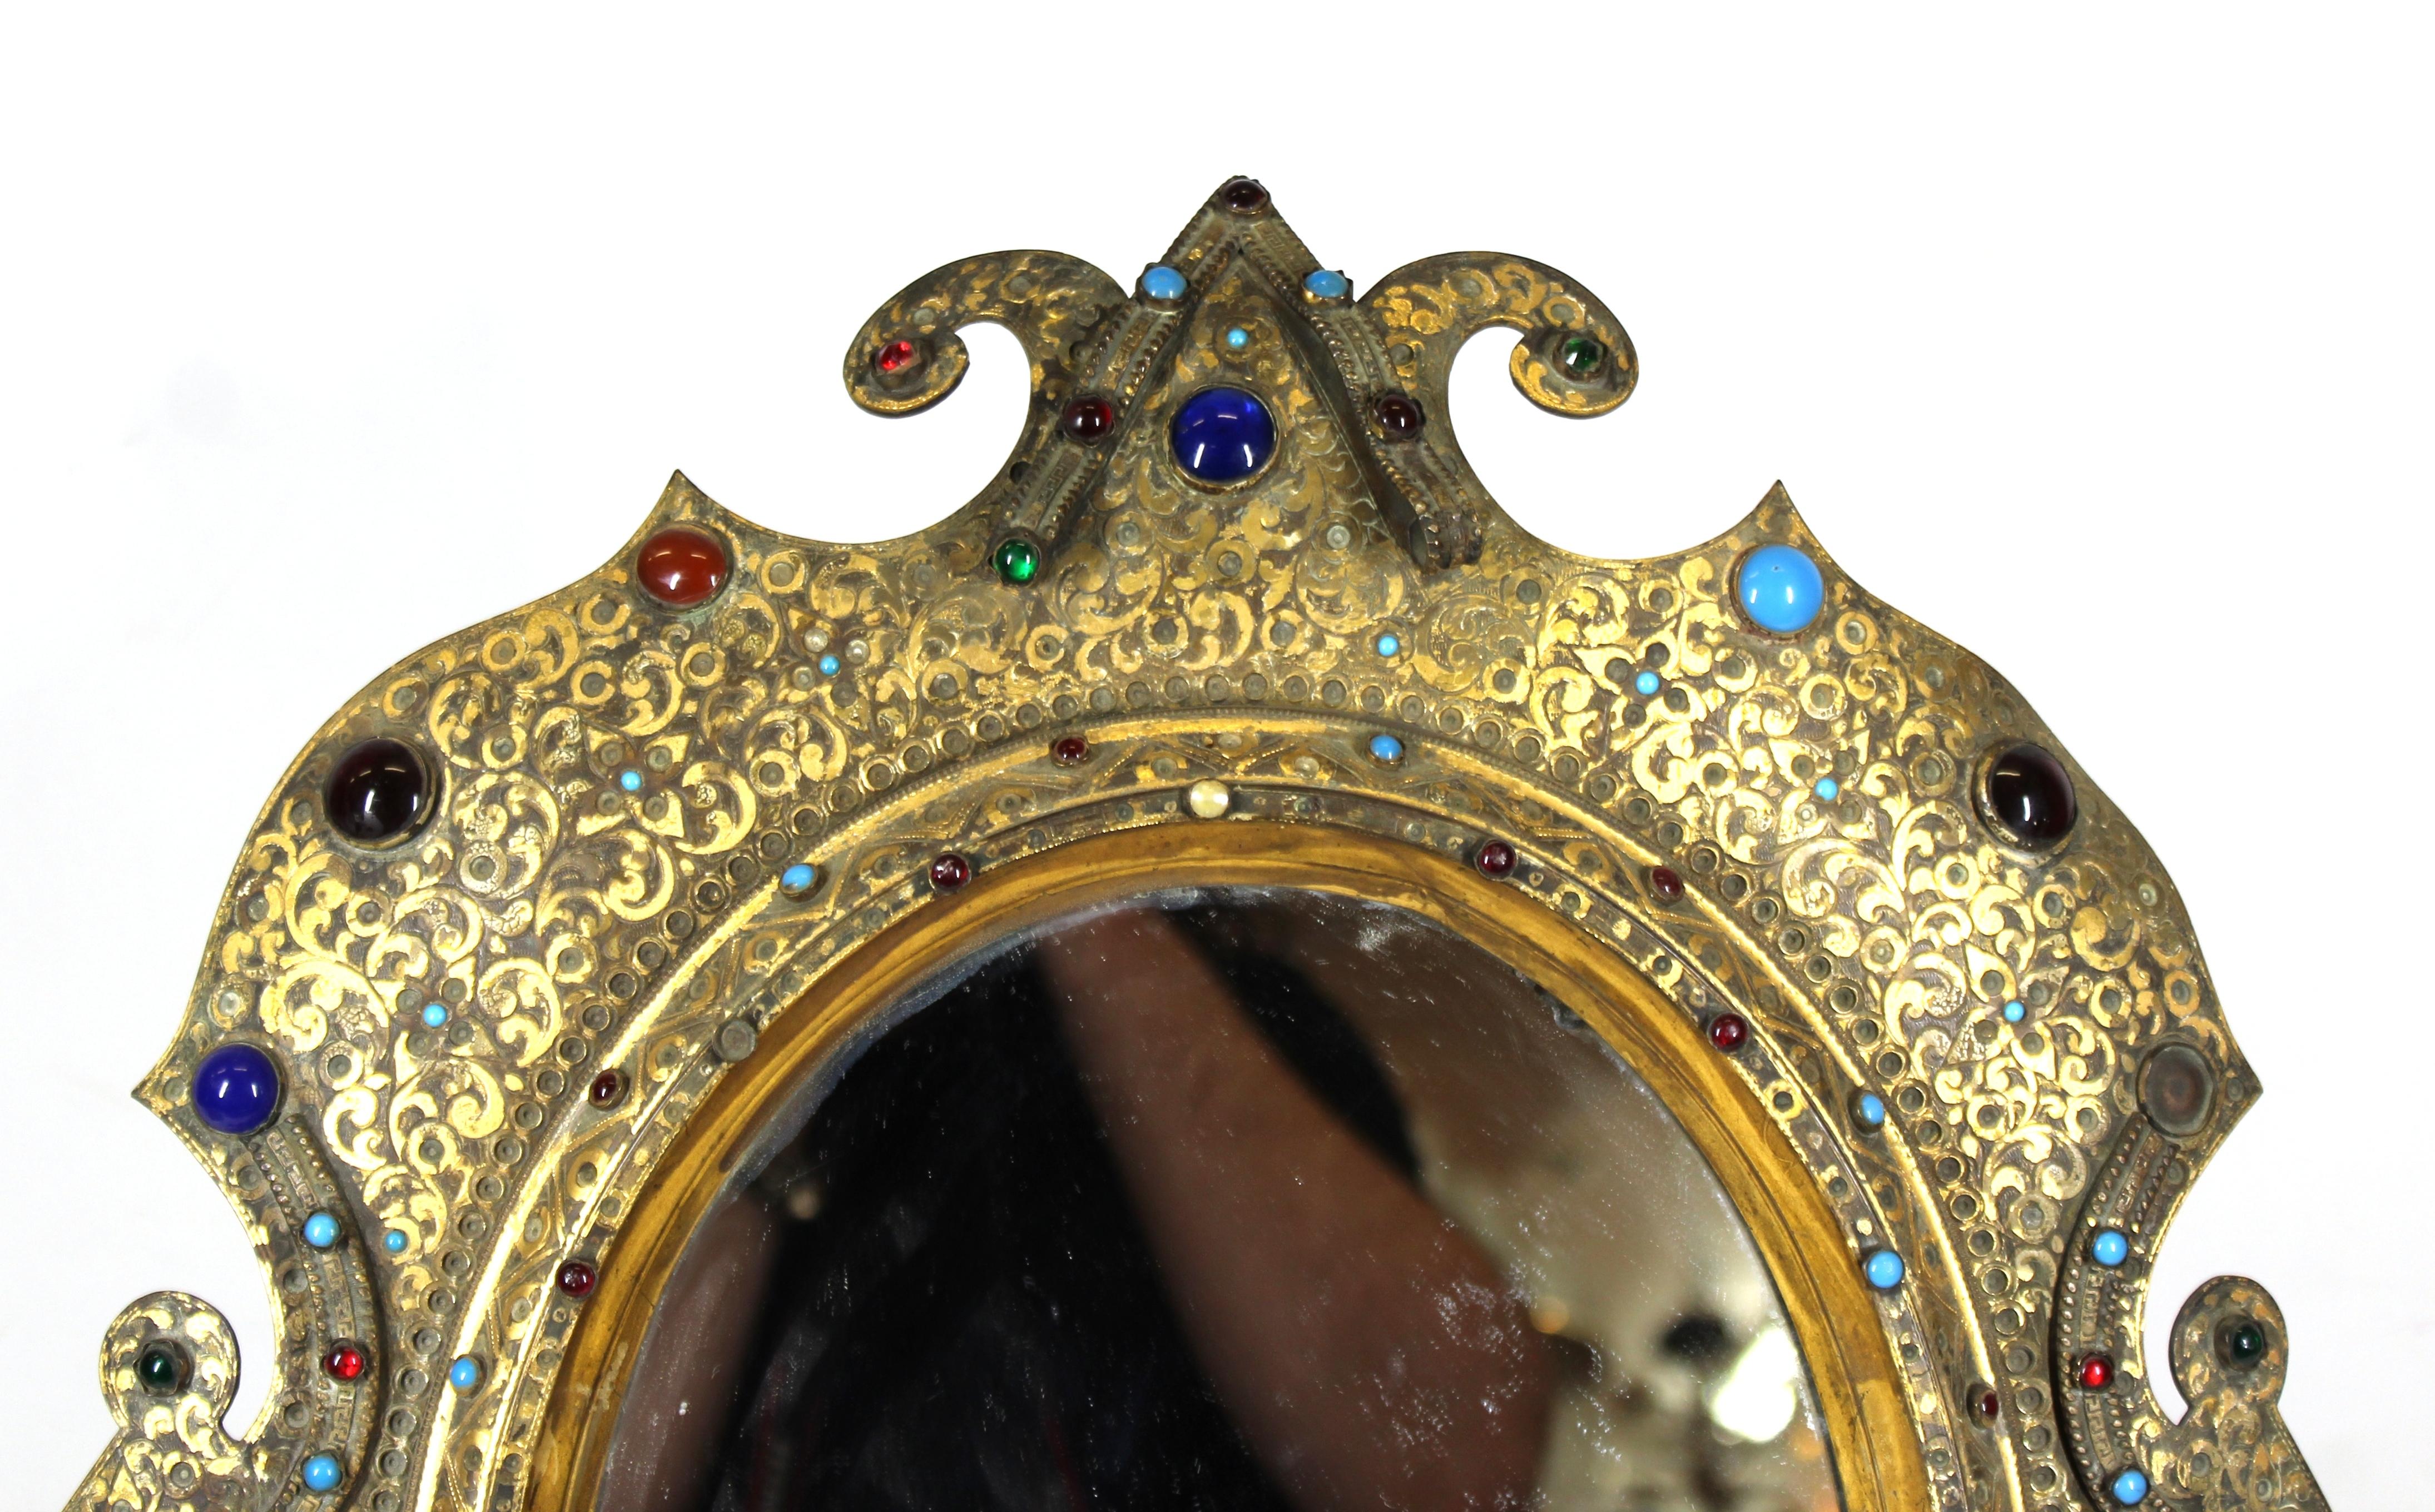 Austrian Moorish Revival period table mirror in gilded bronze, with enameled surface and jewel cabochon inserts. The oval shaped mirror stands on scrolled legs. Minor losses to enamel. Handmade in Austria during the mid-19th century, the piece has a